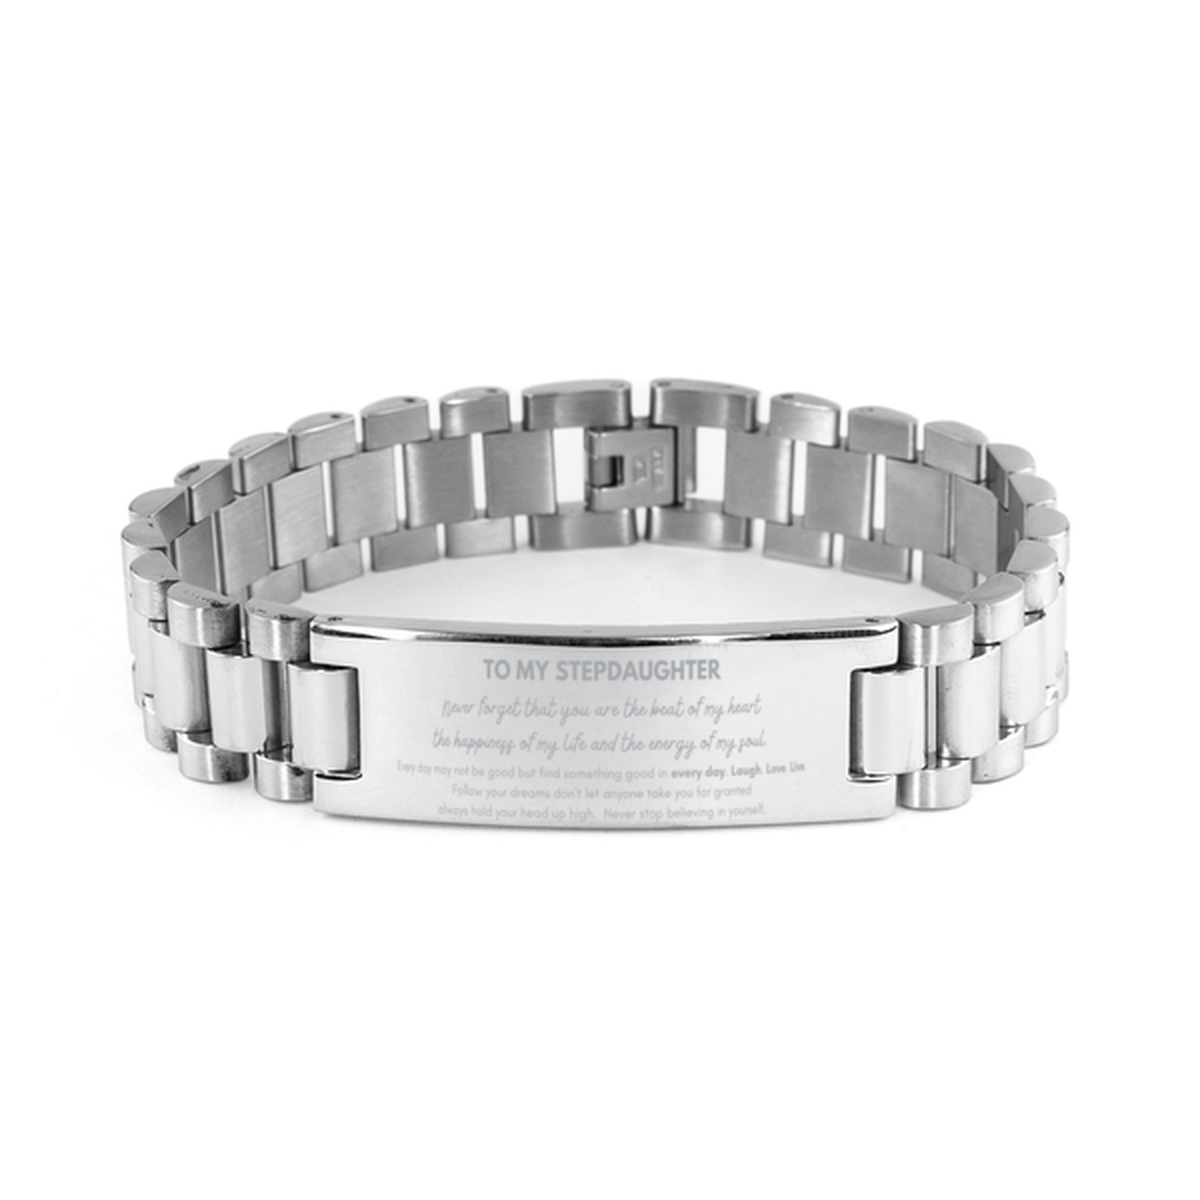 To My Stepdaughter Bracelet Gifts, Christmas Stepdaughter Ladder Stainless Steel Bracelet Present, Birthday Unique Motivational For Stepdaughter, To My Stepdaughter Never forget that you are the beat of my heart the happiness of my life and the energy of